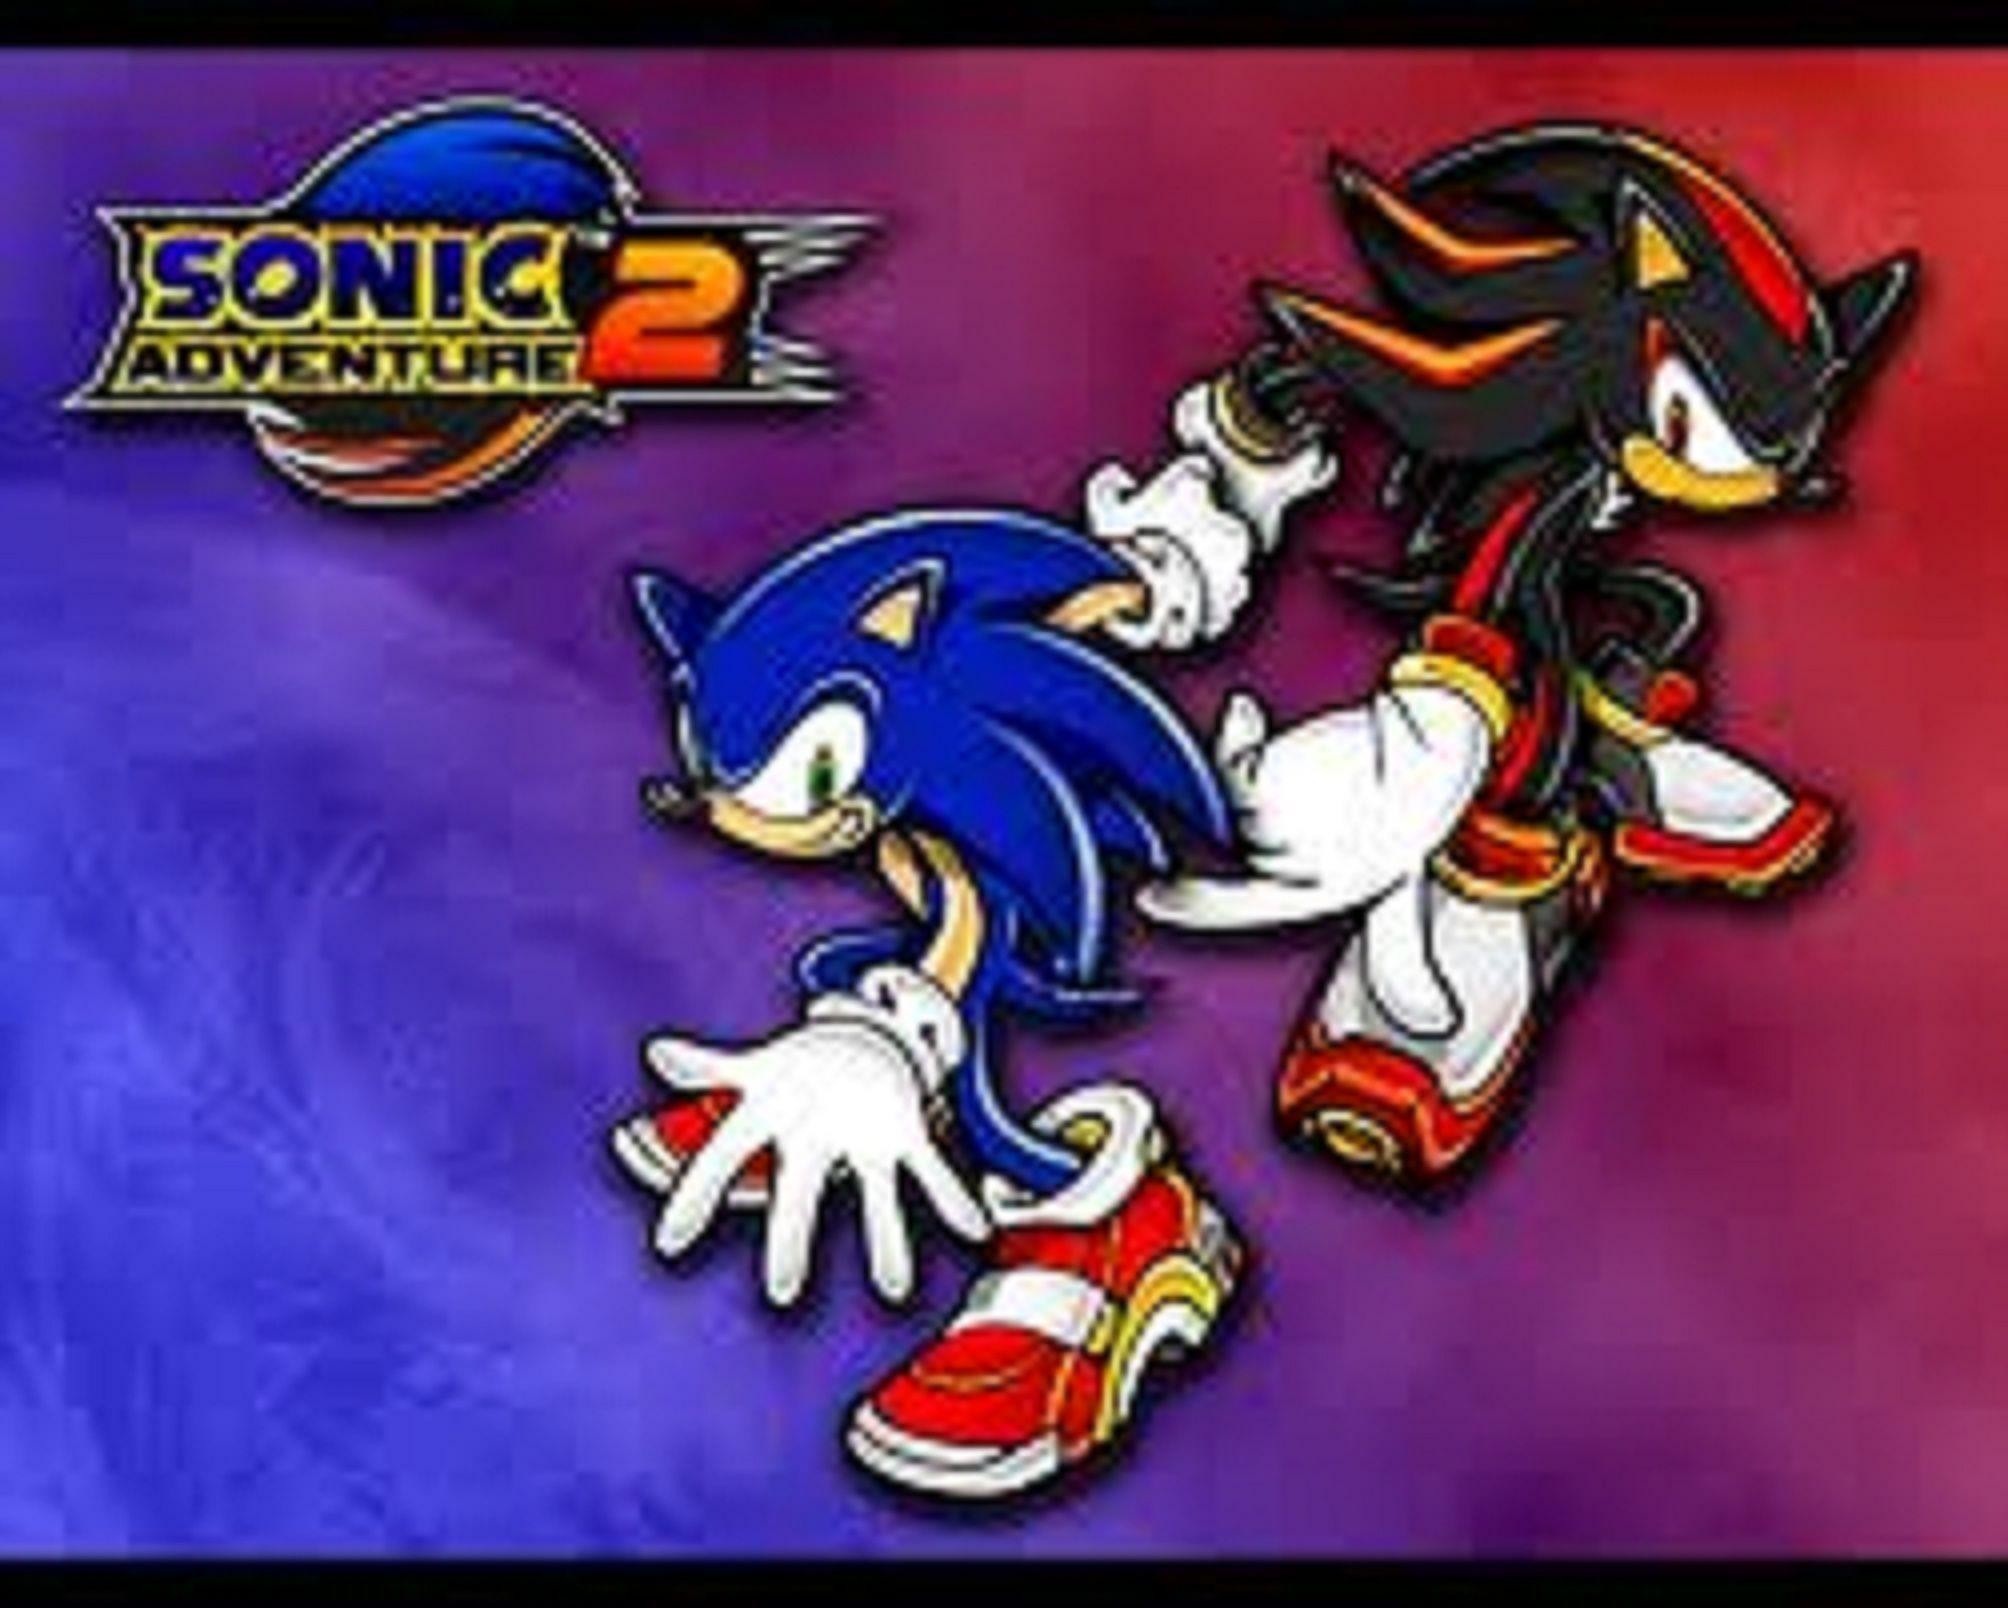 2008x1608 Sonic Adventure 2 Battle Wallpaper - The Sonic, MLP, and Alpha and .